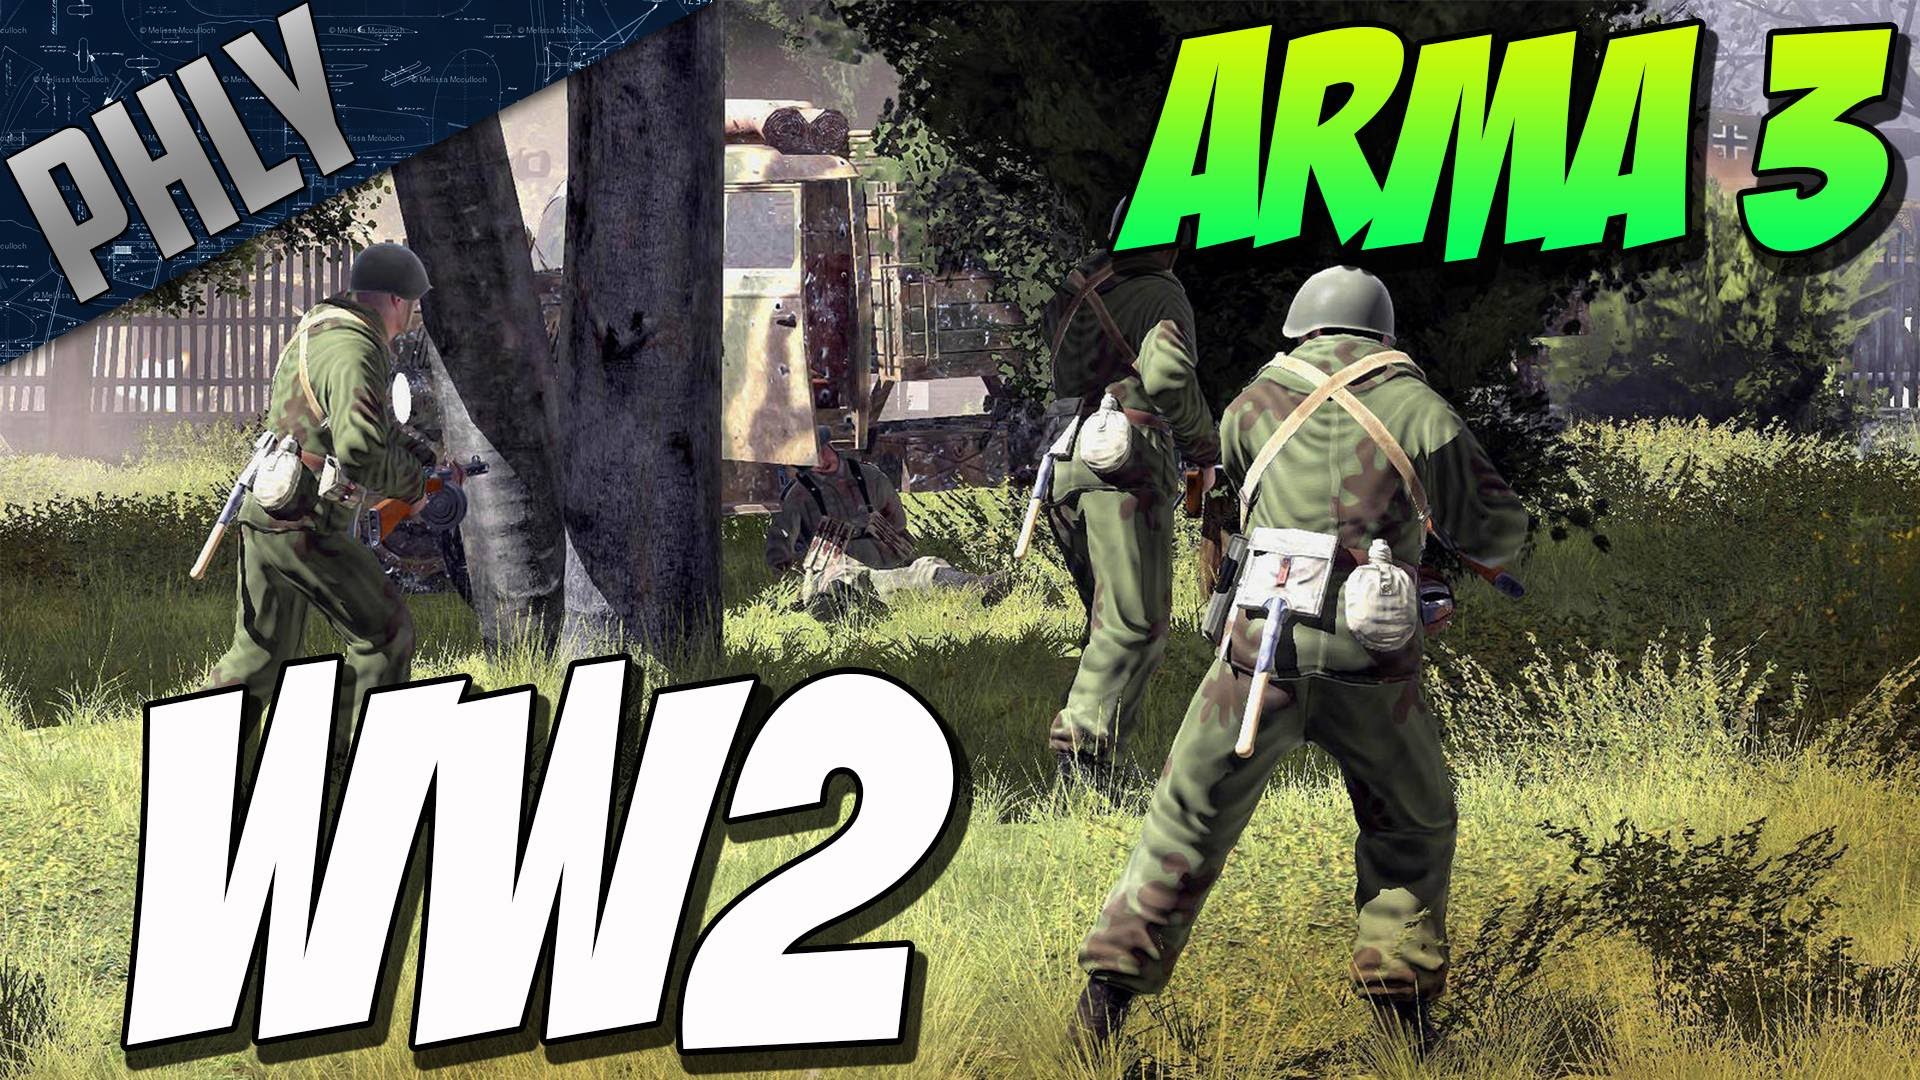 BEHIND ENEMY LINES – World War 2 Iron Front 1944 ( Arma 3 Gameplay)